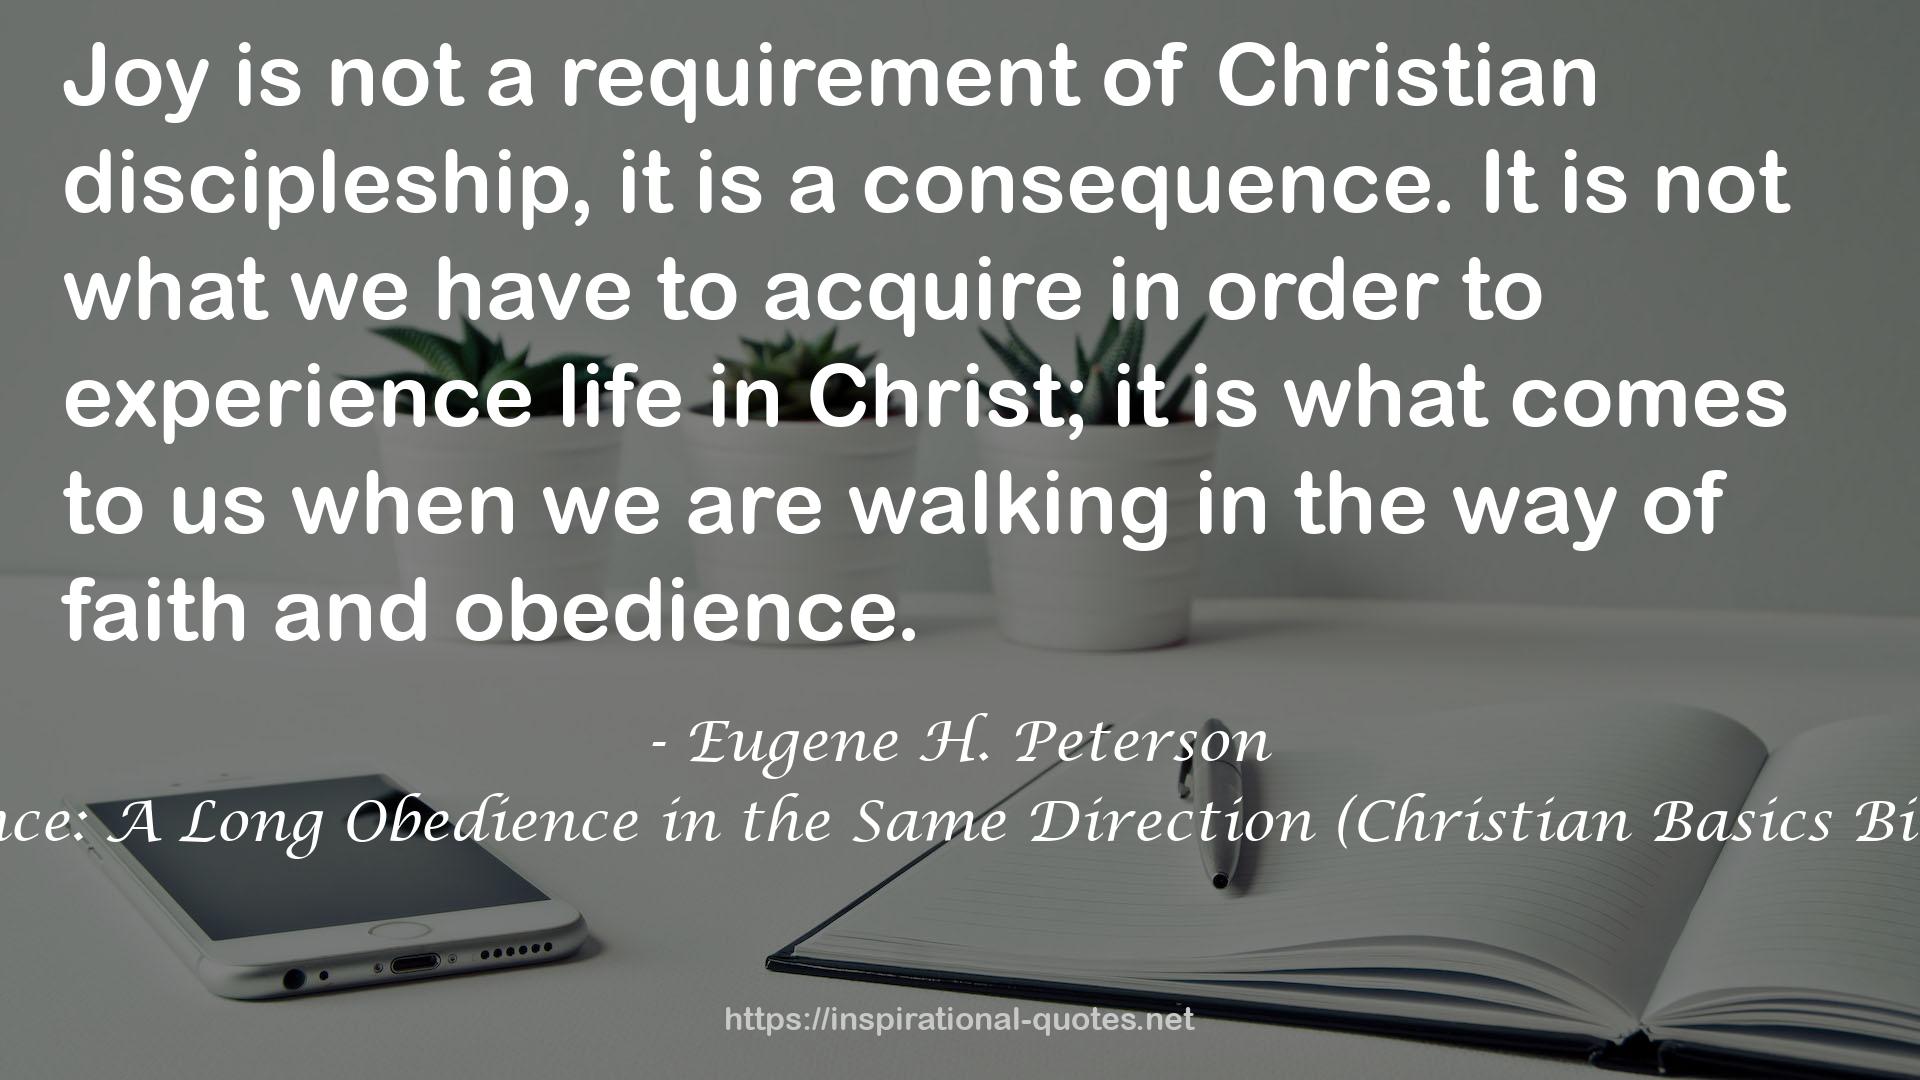 Perseverance: A Long Obedience in the Same Direction (Christian Basics Bible Studies) QUOTES